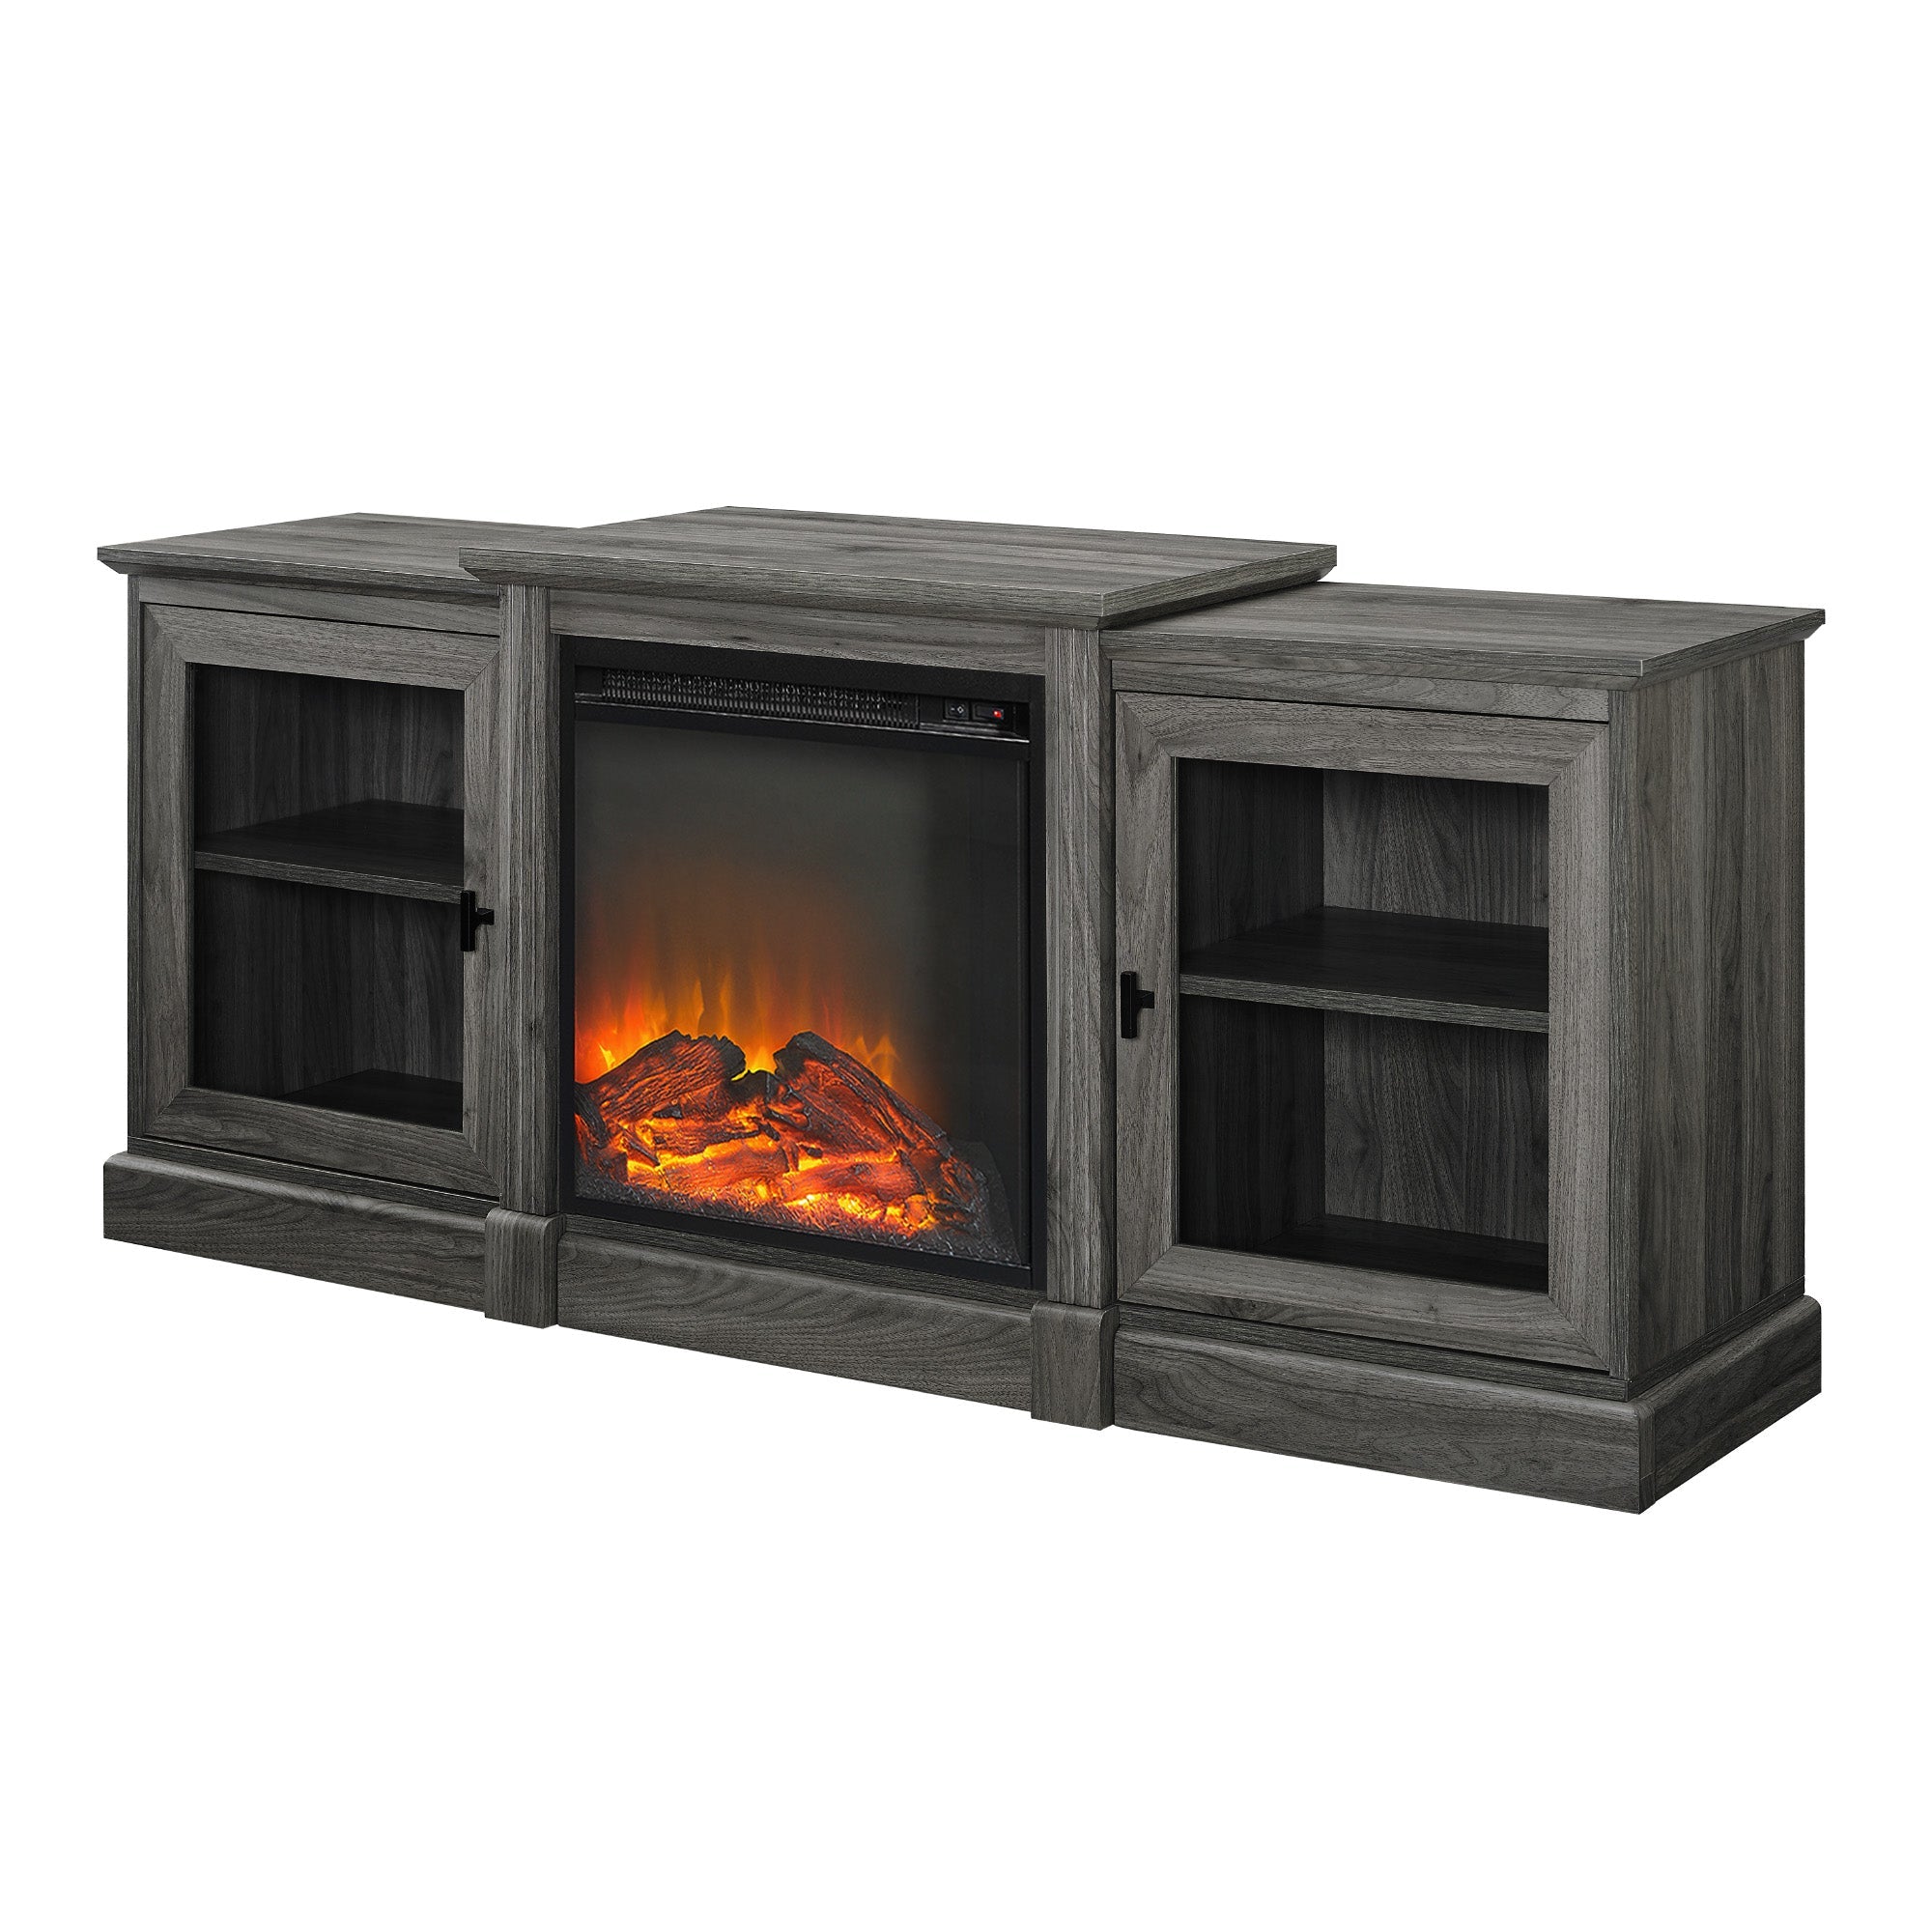 60" Classic Tiered Top Fireplace TV Console - East Shore Modern Home Furnishings